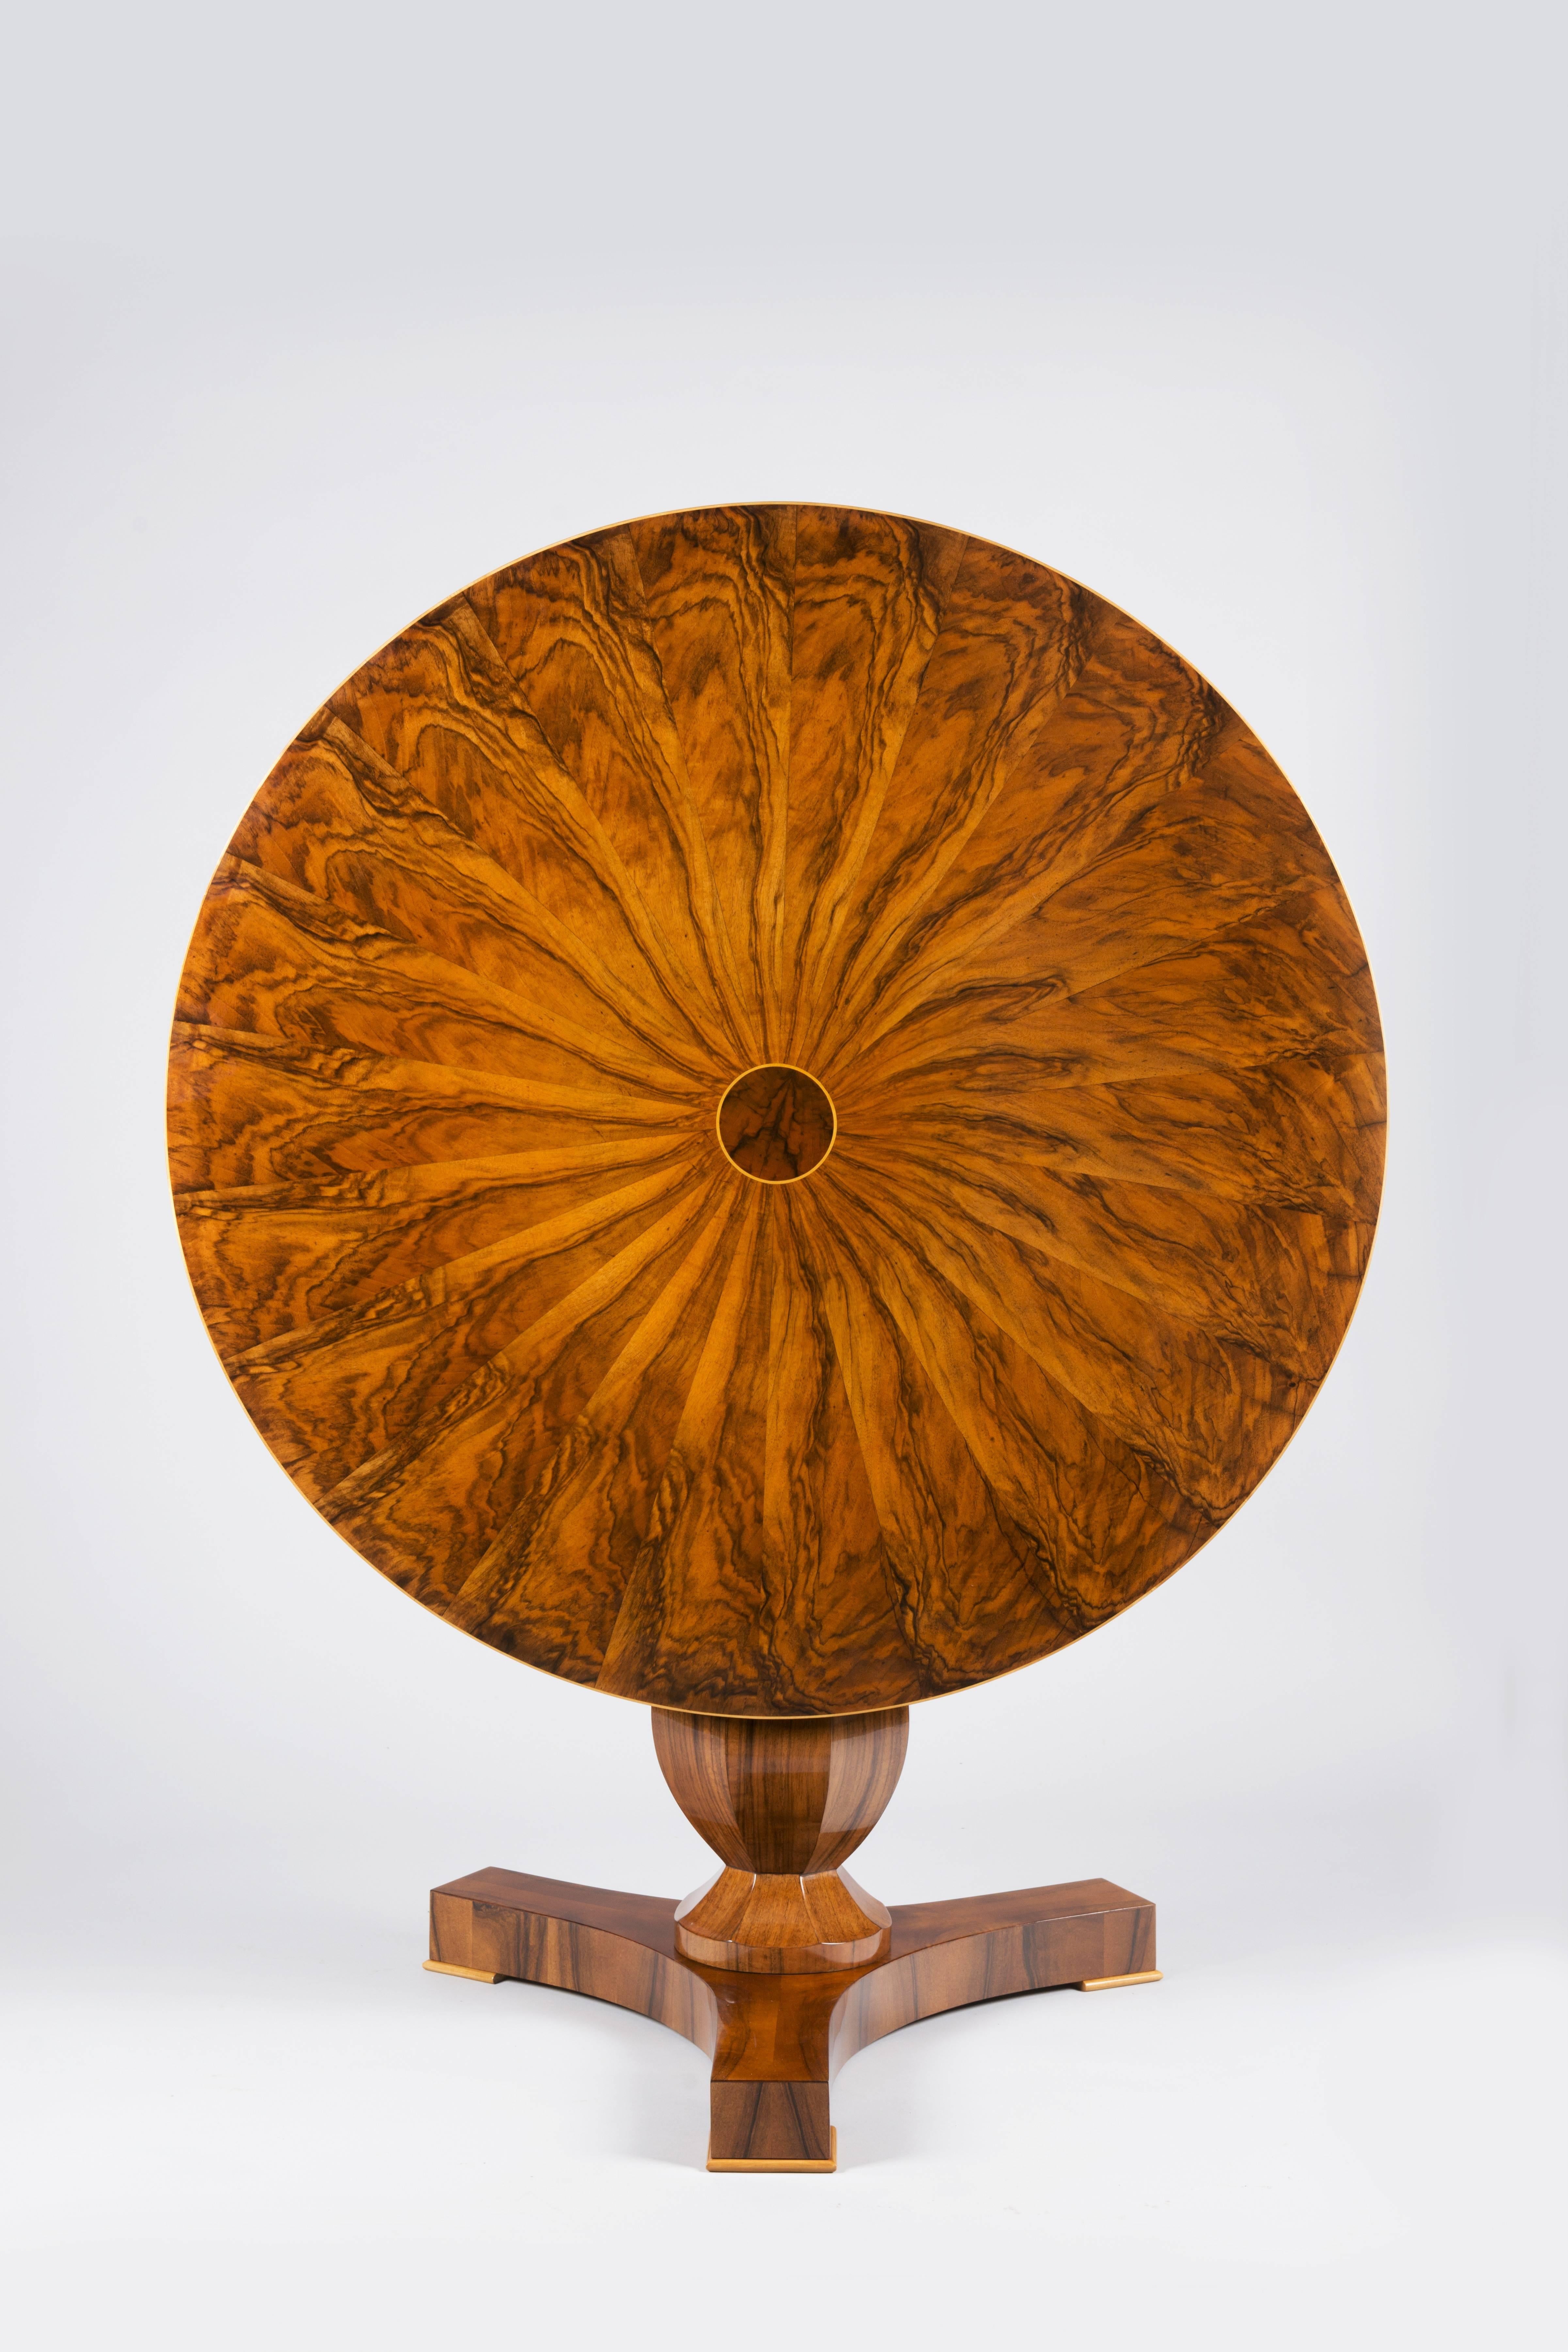 Vividly slip-matched walnut veneer, with pear shaped column supported by tripod base.
South Germany, circa 1830.